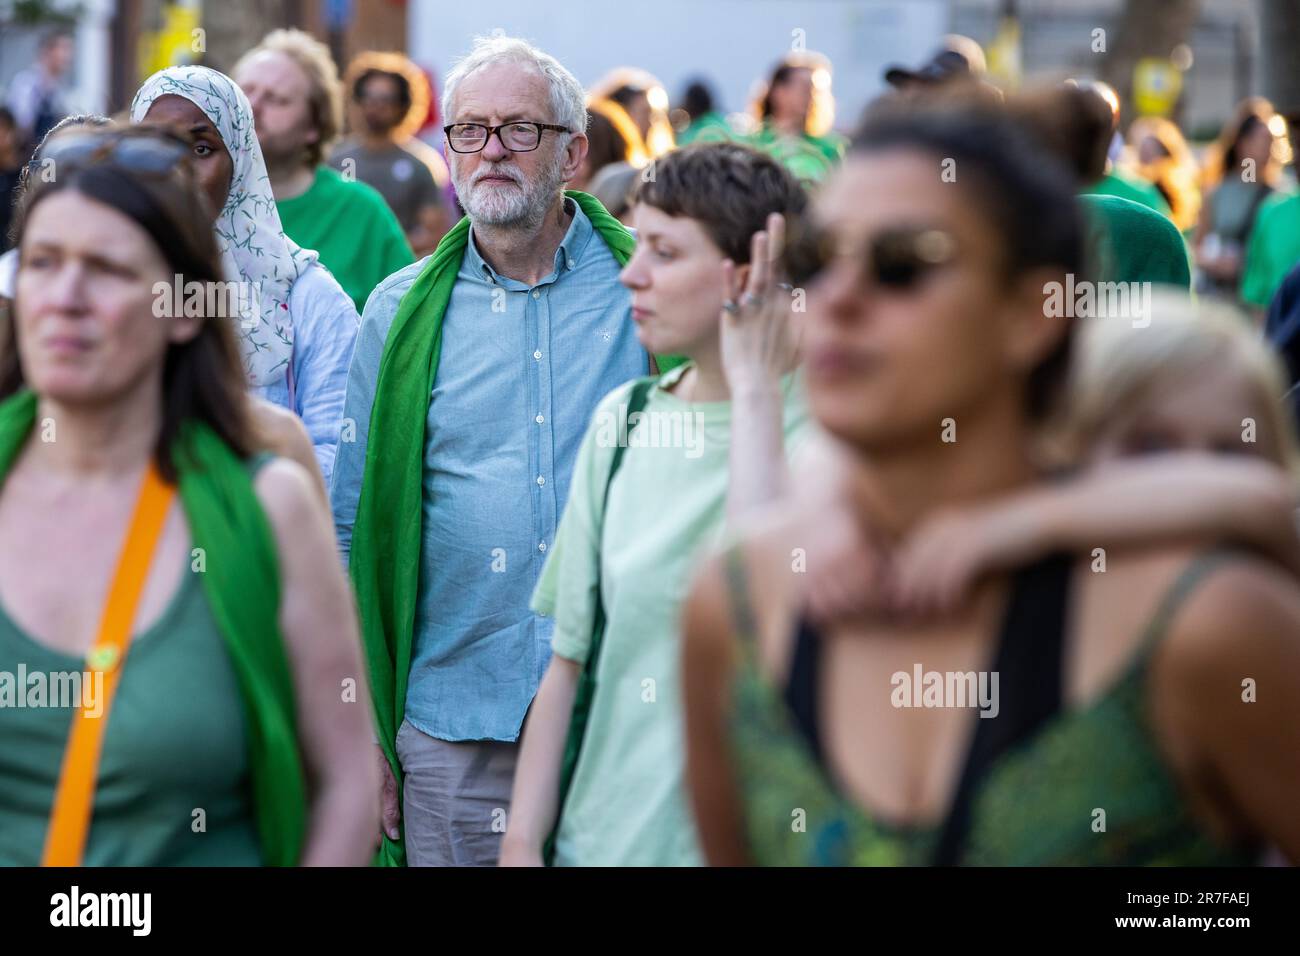 London, UK. 14th June, 2023. Jeremy Corbyn, MP for Islington North, accompanies members of the Grenfell community on the Grenfell Silent Walk around West Kensington. The event was organised to mark the sixth anniversary of the Grenfell Tower fire on 14 June 2017 as a result of which 72 people died and over 70 were injured. The Grenfell Tower Inquiry concluded in November 2022 that all the deaths in the fire were avoidable but no criminal prosecutions have yet been brought. Credit: Mark Kerrison/Alamy Live News Stock Photo